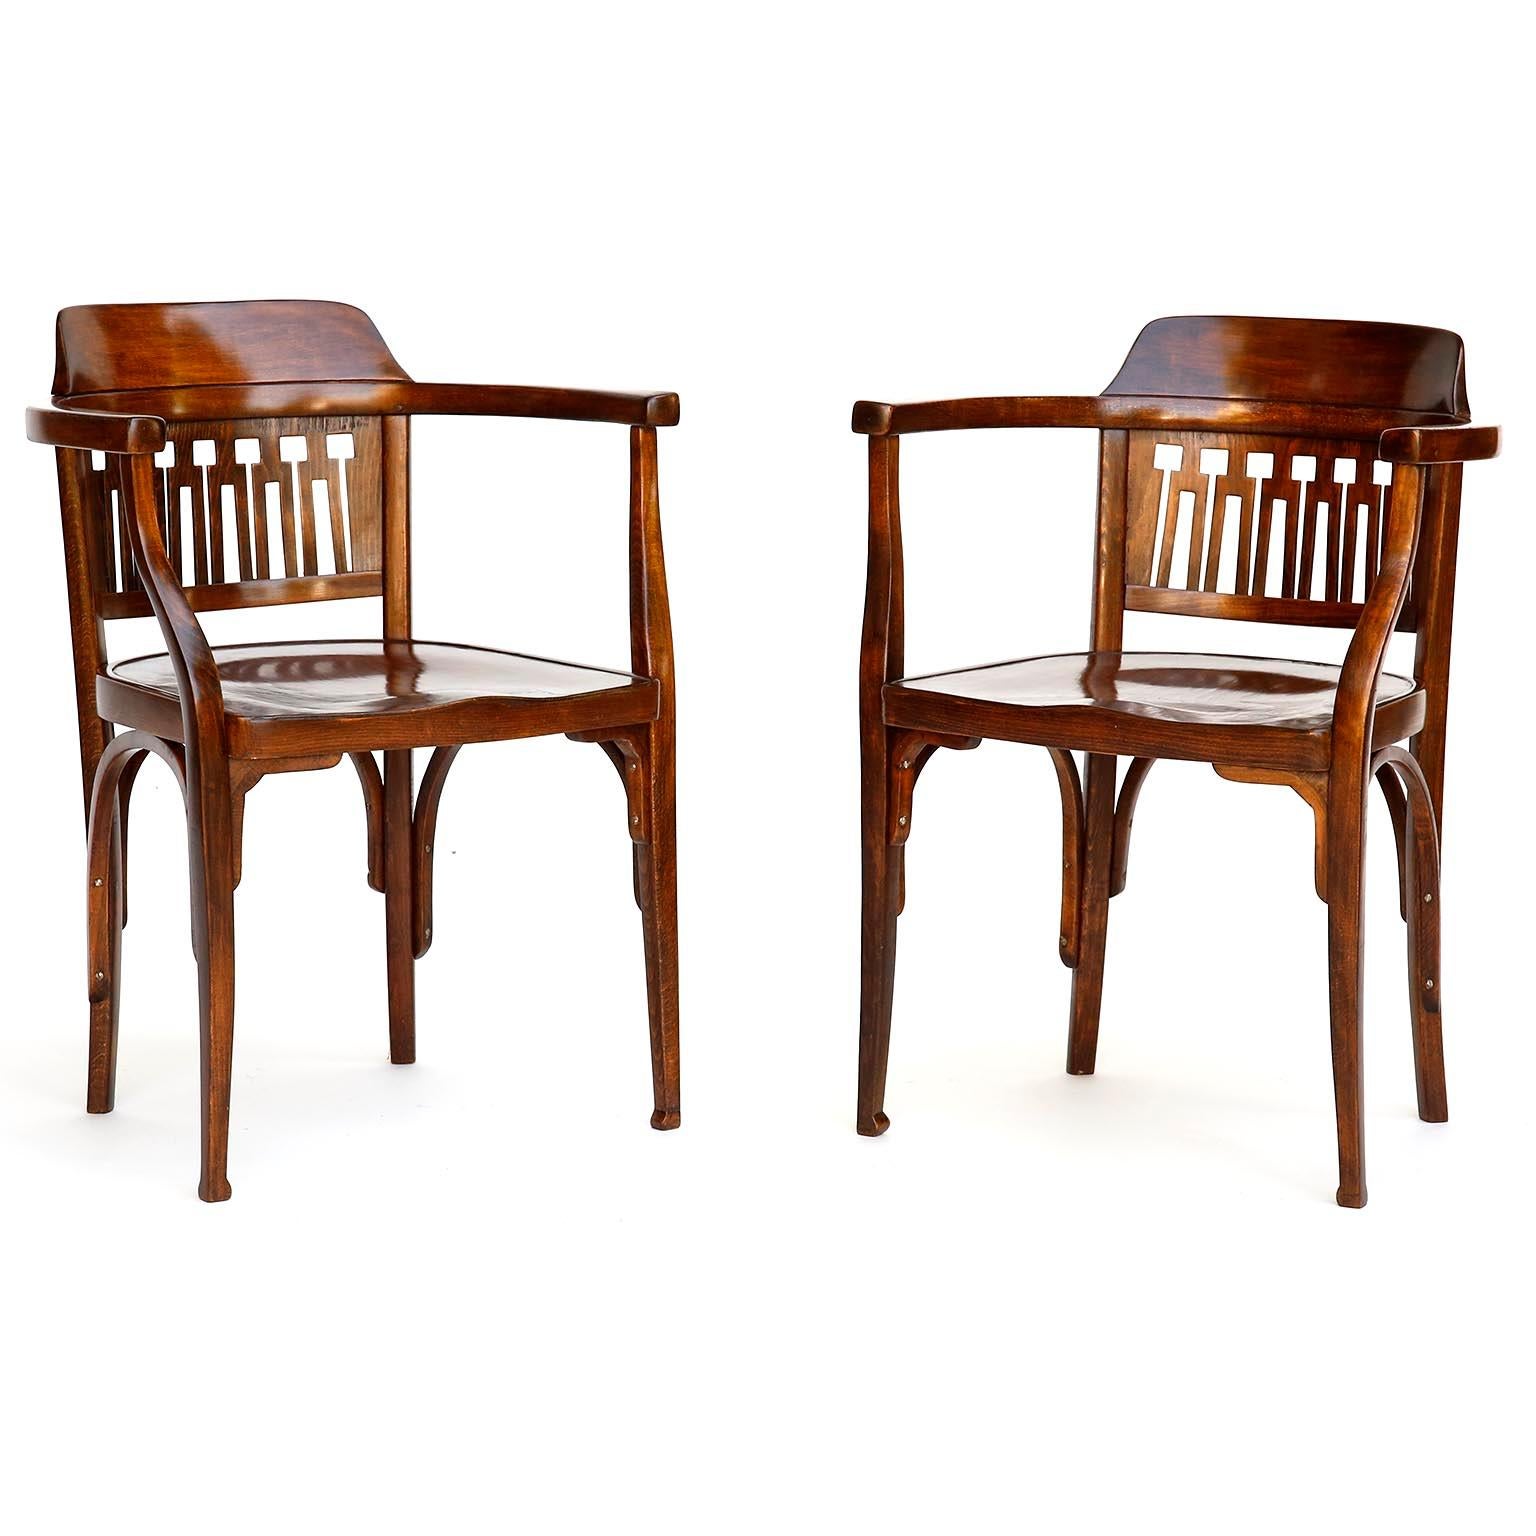 A pair of Vienna Secession bentwood armchairs by Otto Wagner and manufactured by Jacob & Josef Kohn (J. & J. Kohn), Austria, circa 1900.

The chairs are in great restored and refurbished condition. They are made of brown stained beech wood similar